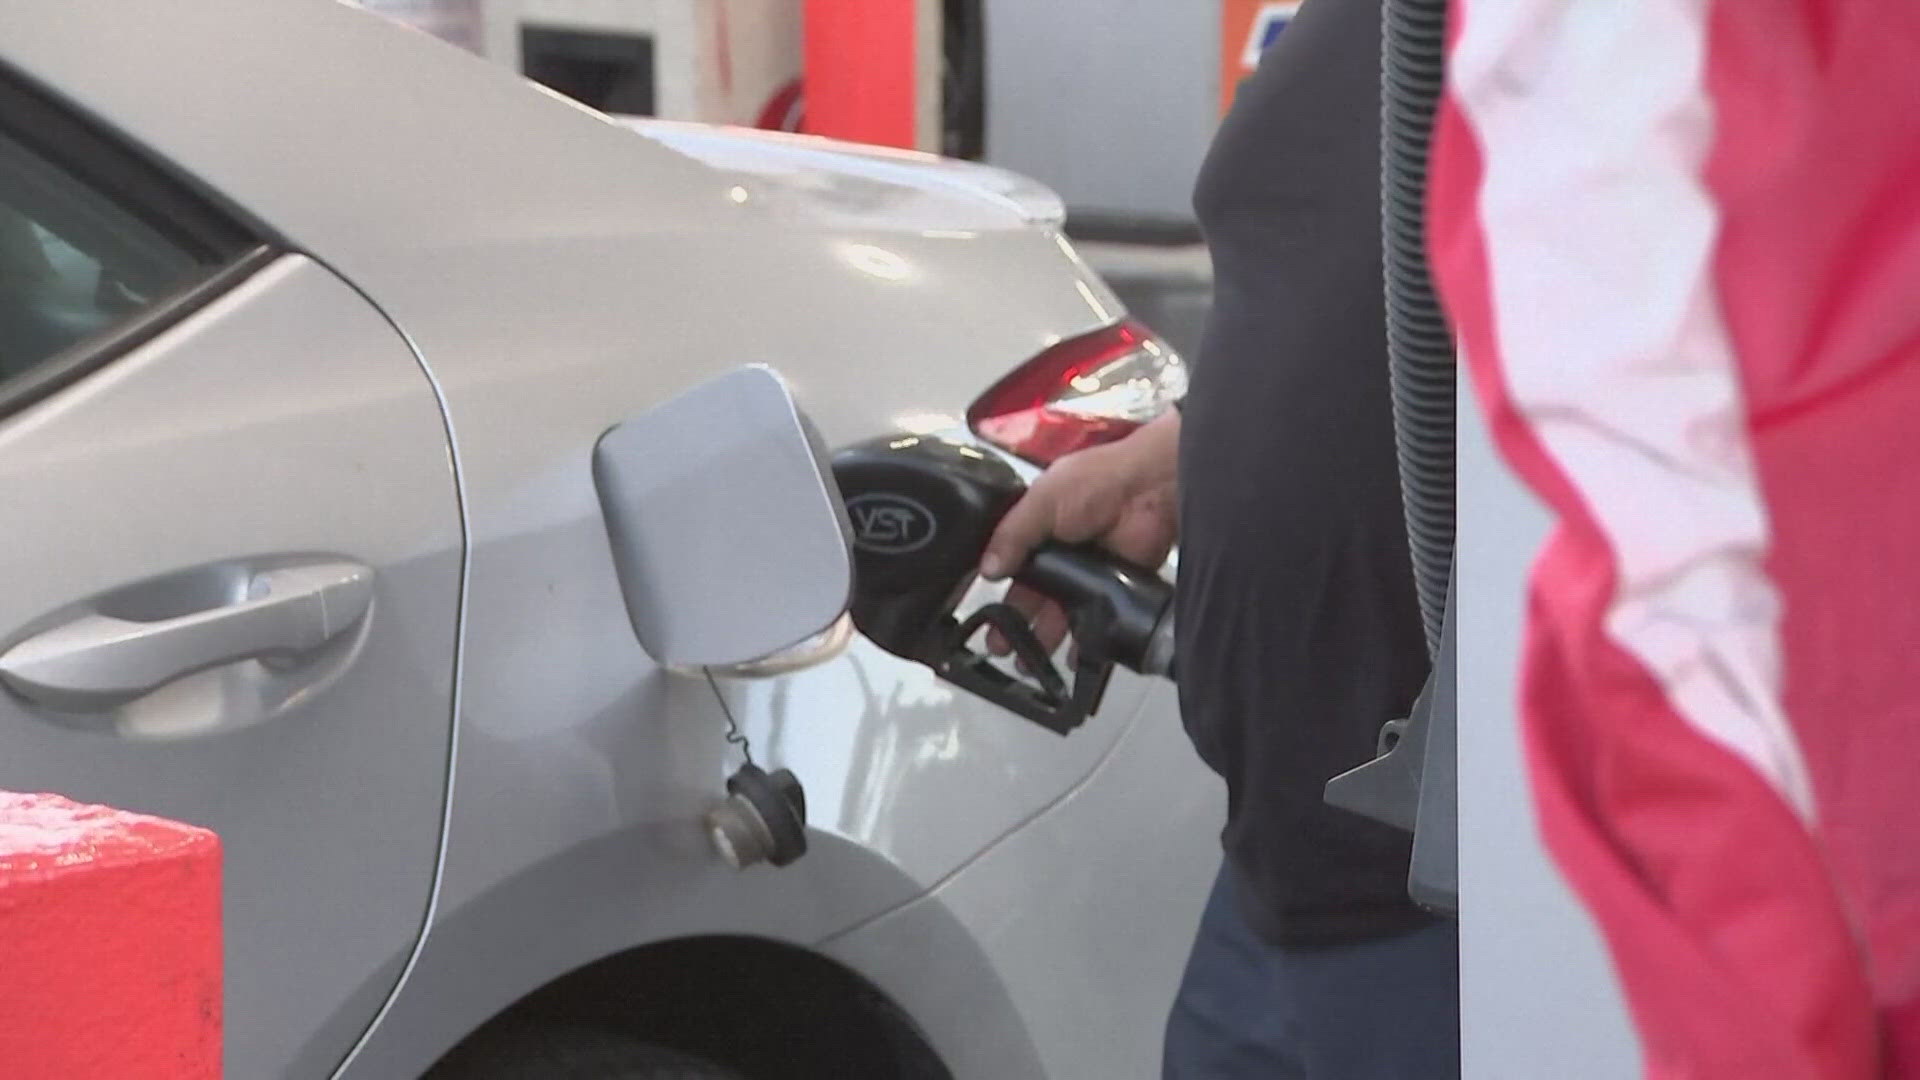 GasBuddy says prices are down 25.3 cents per gallon in Akron, bringing the city’s average to $3.38.